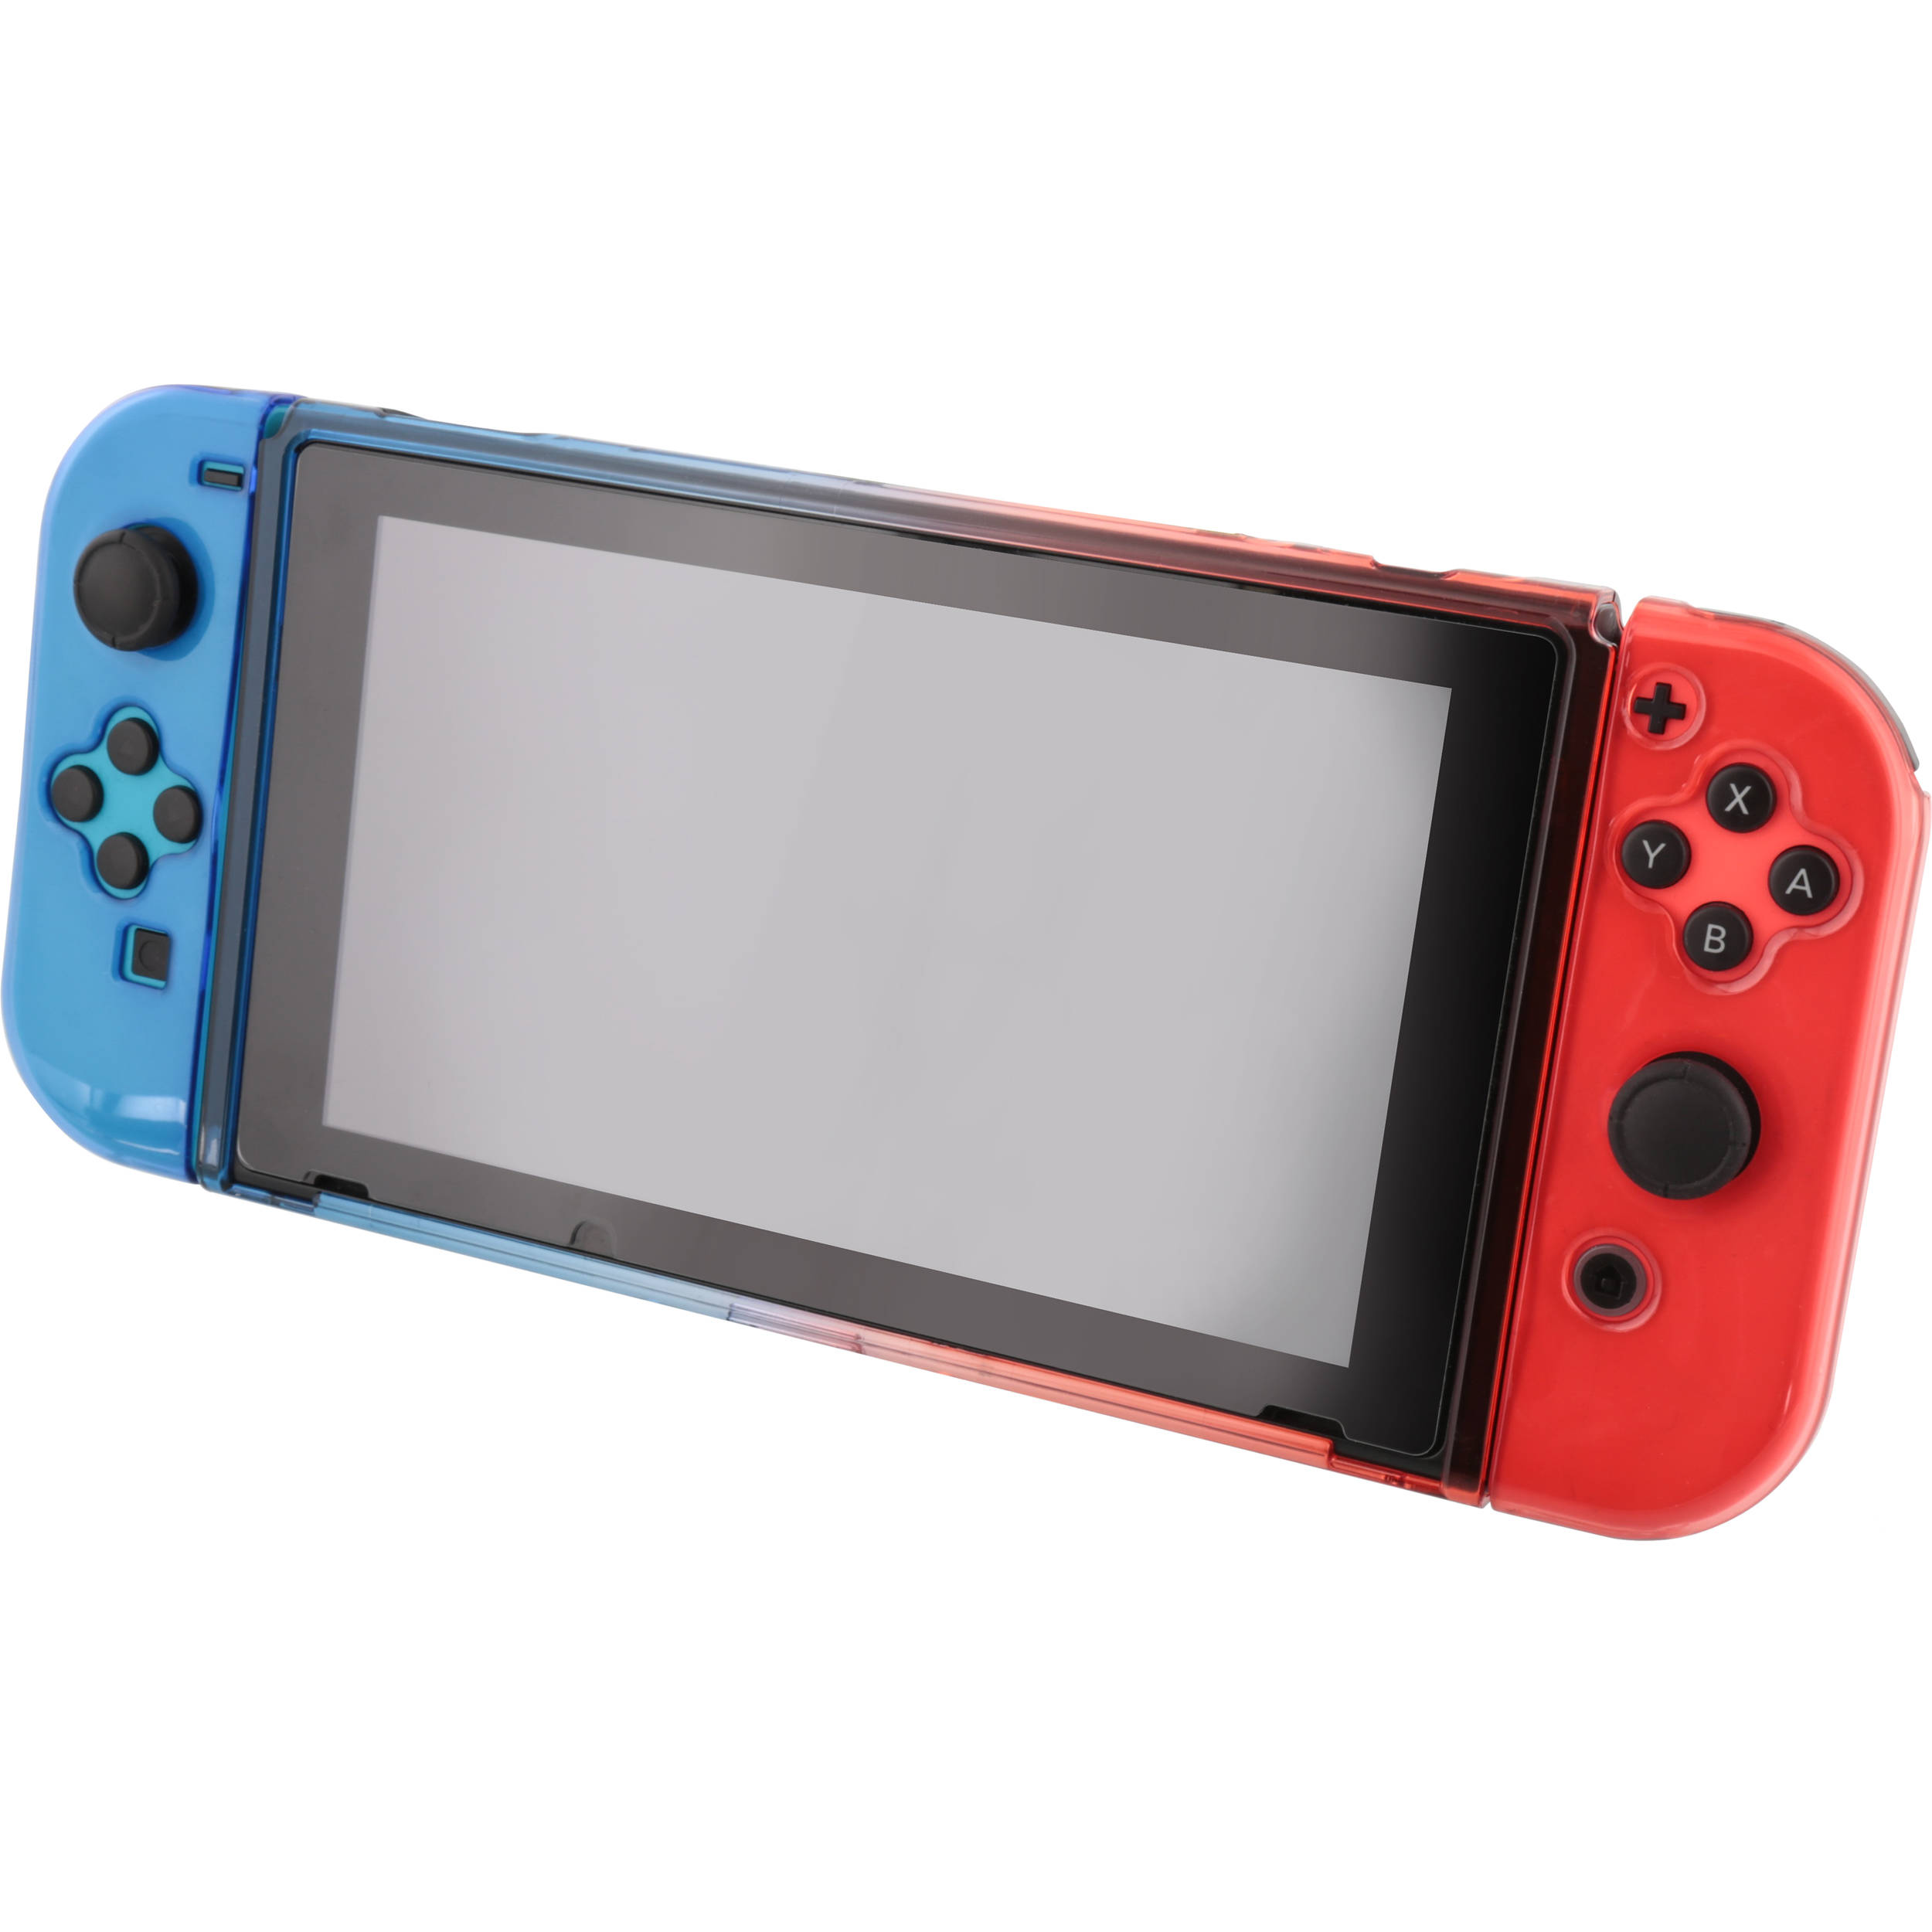 red and blue joy cons